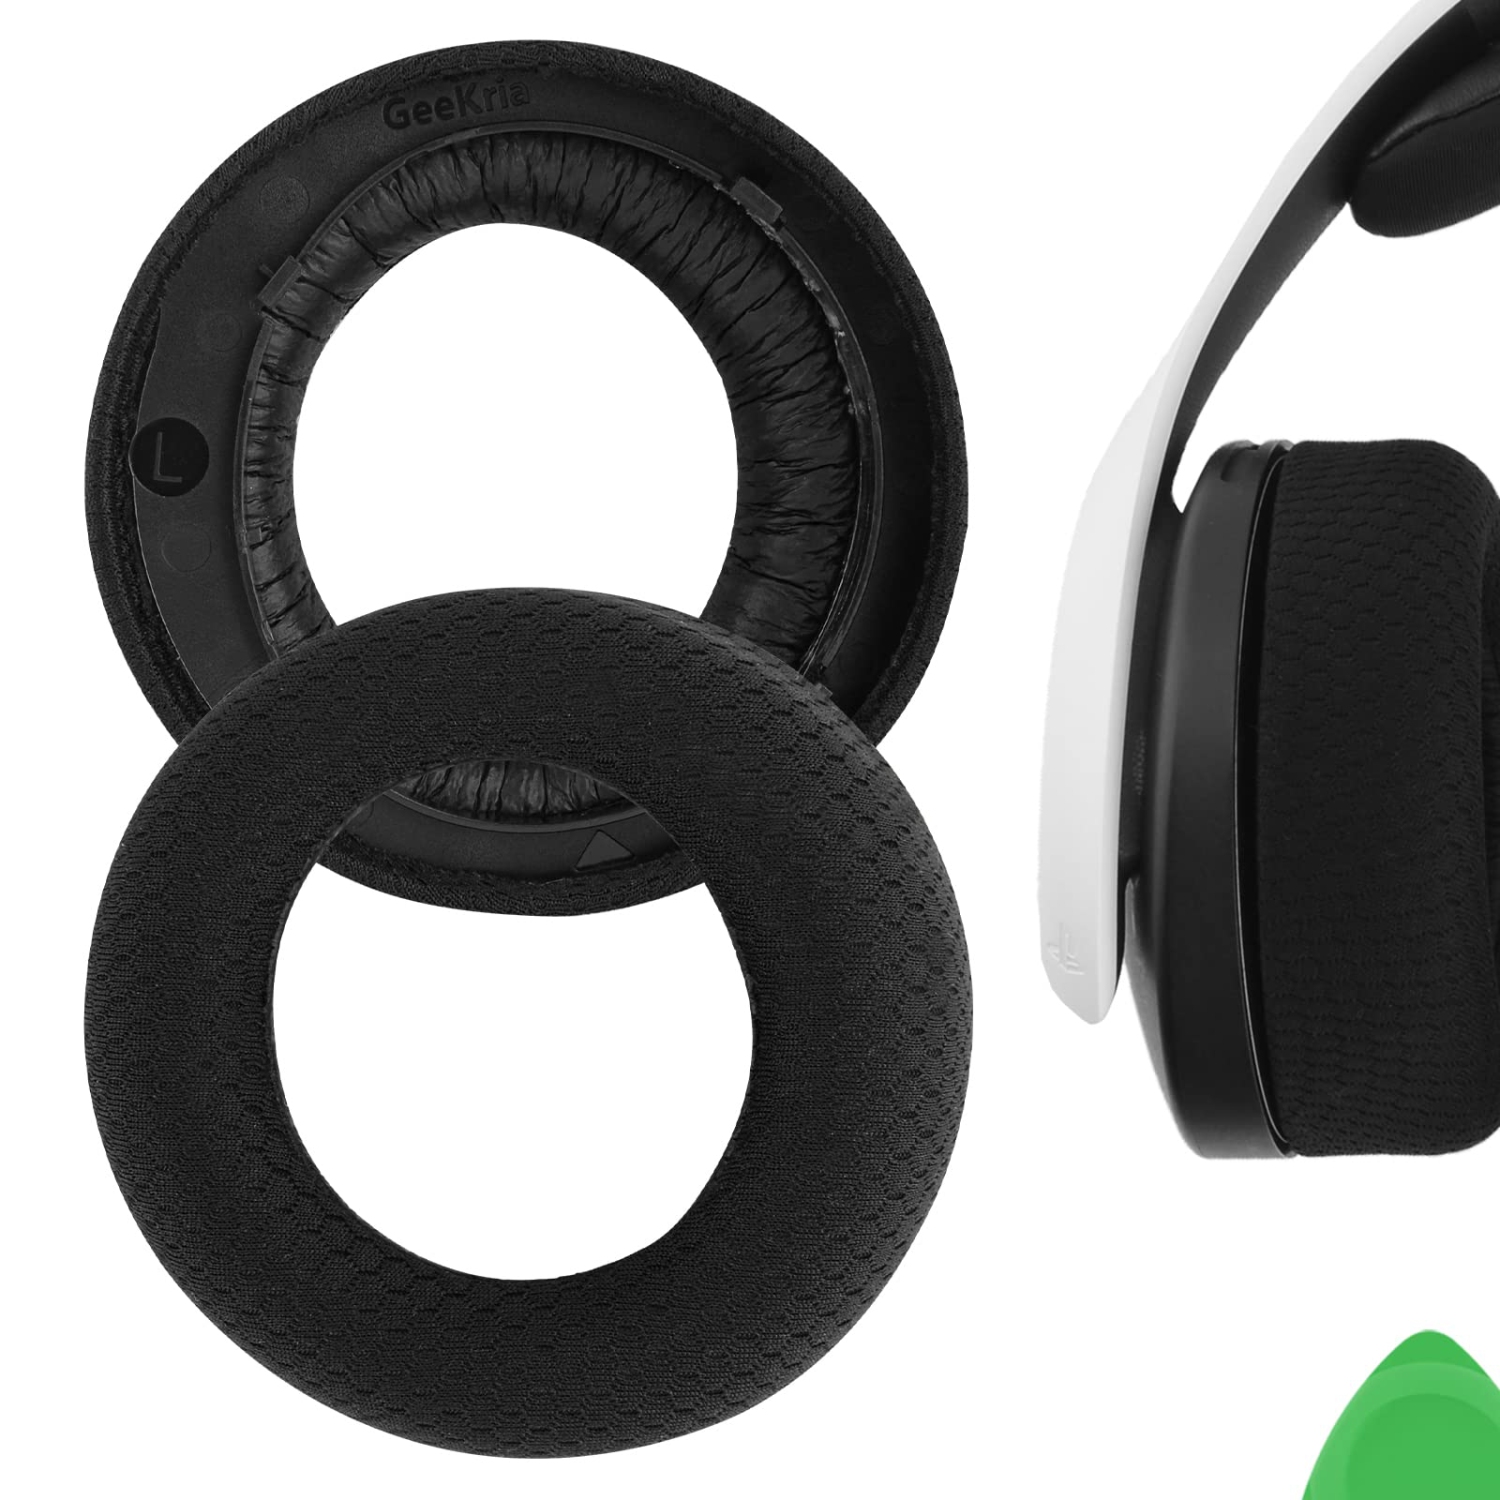 Geekria Comfort Mesh Fabric Replacement Ear Pads for Sony Playstation 5 Pulse 3D PS5 Wireless Headphones Ear Cushions, Heads